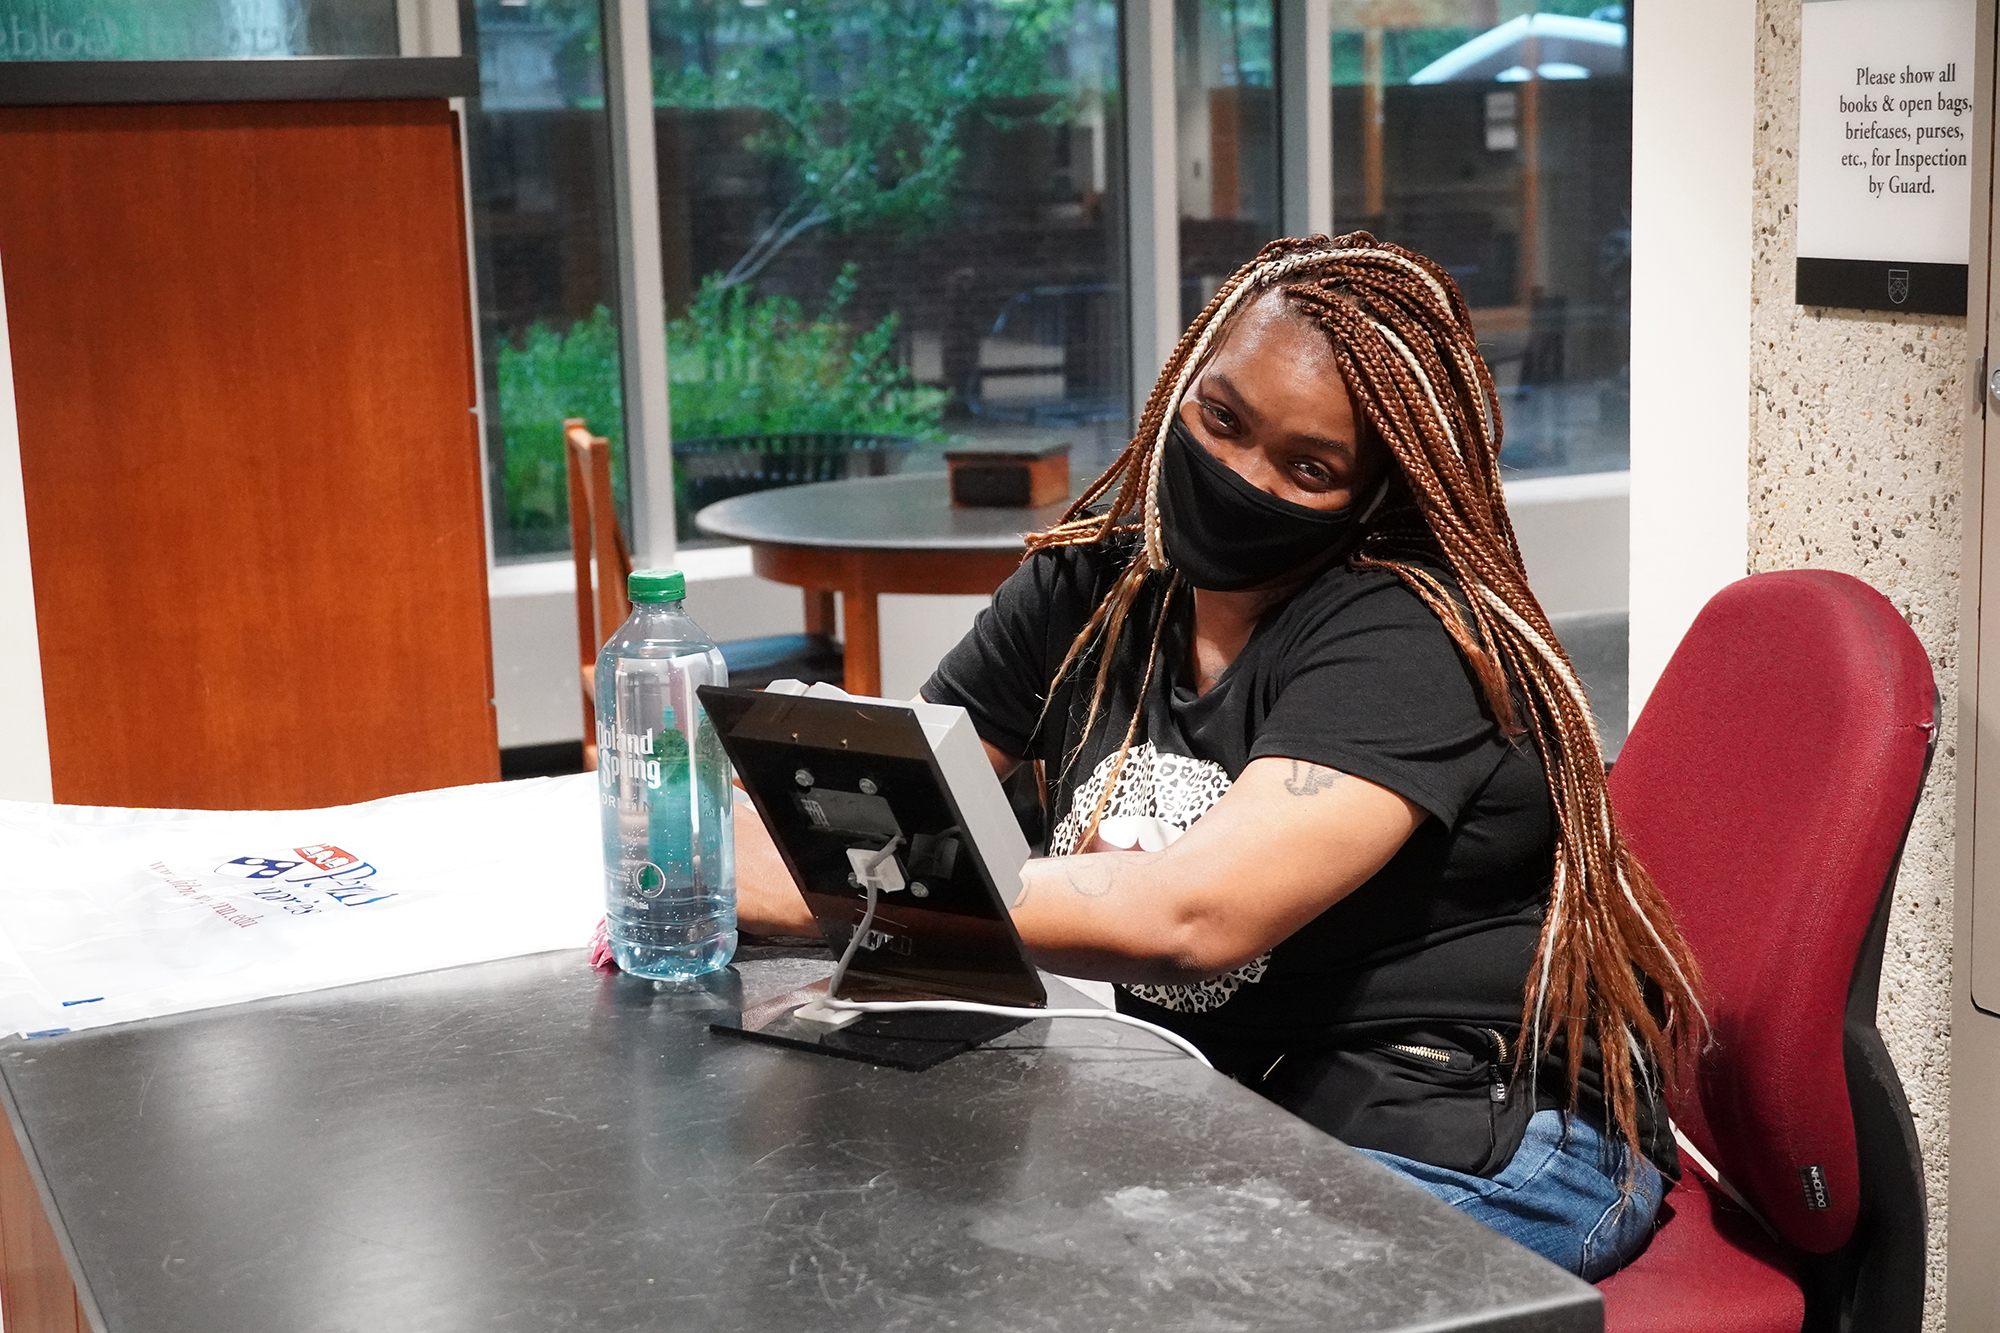 Angela Campbell wears a face mask and sits at a desk in the library foyer.